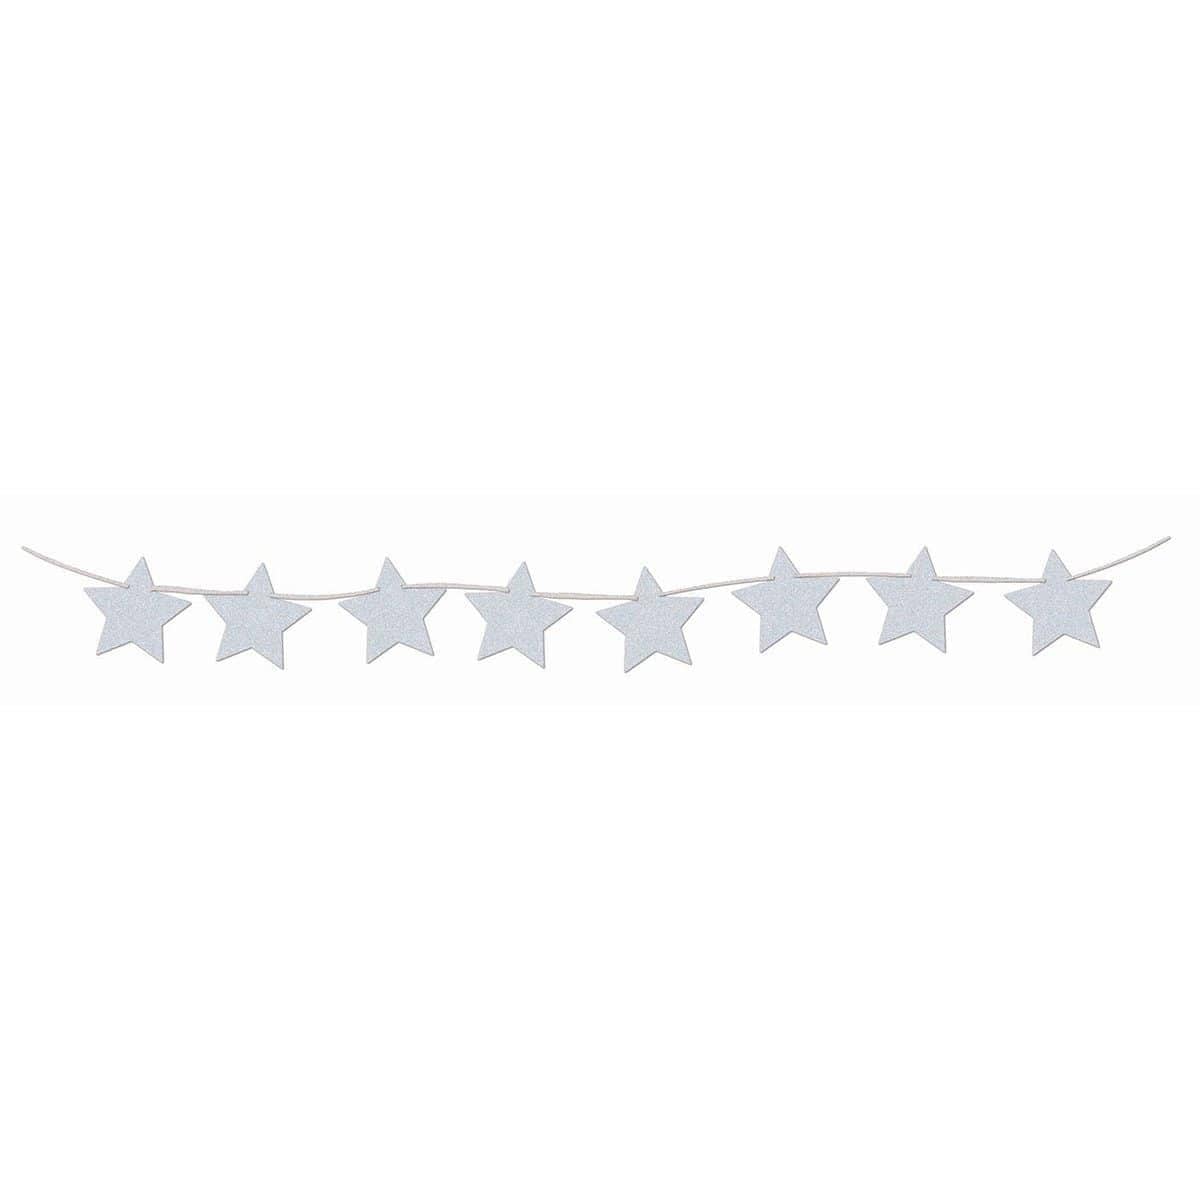 Buy Decorations Diamond Star Banner 8ft. - Light Blue sold at Party Expert